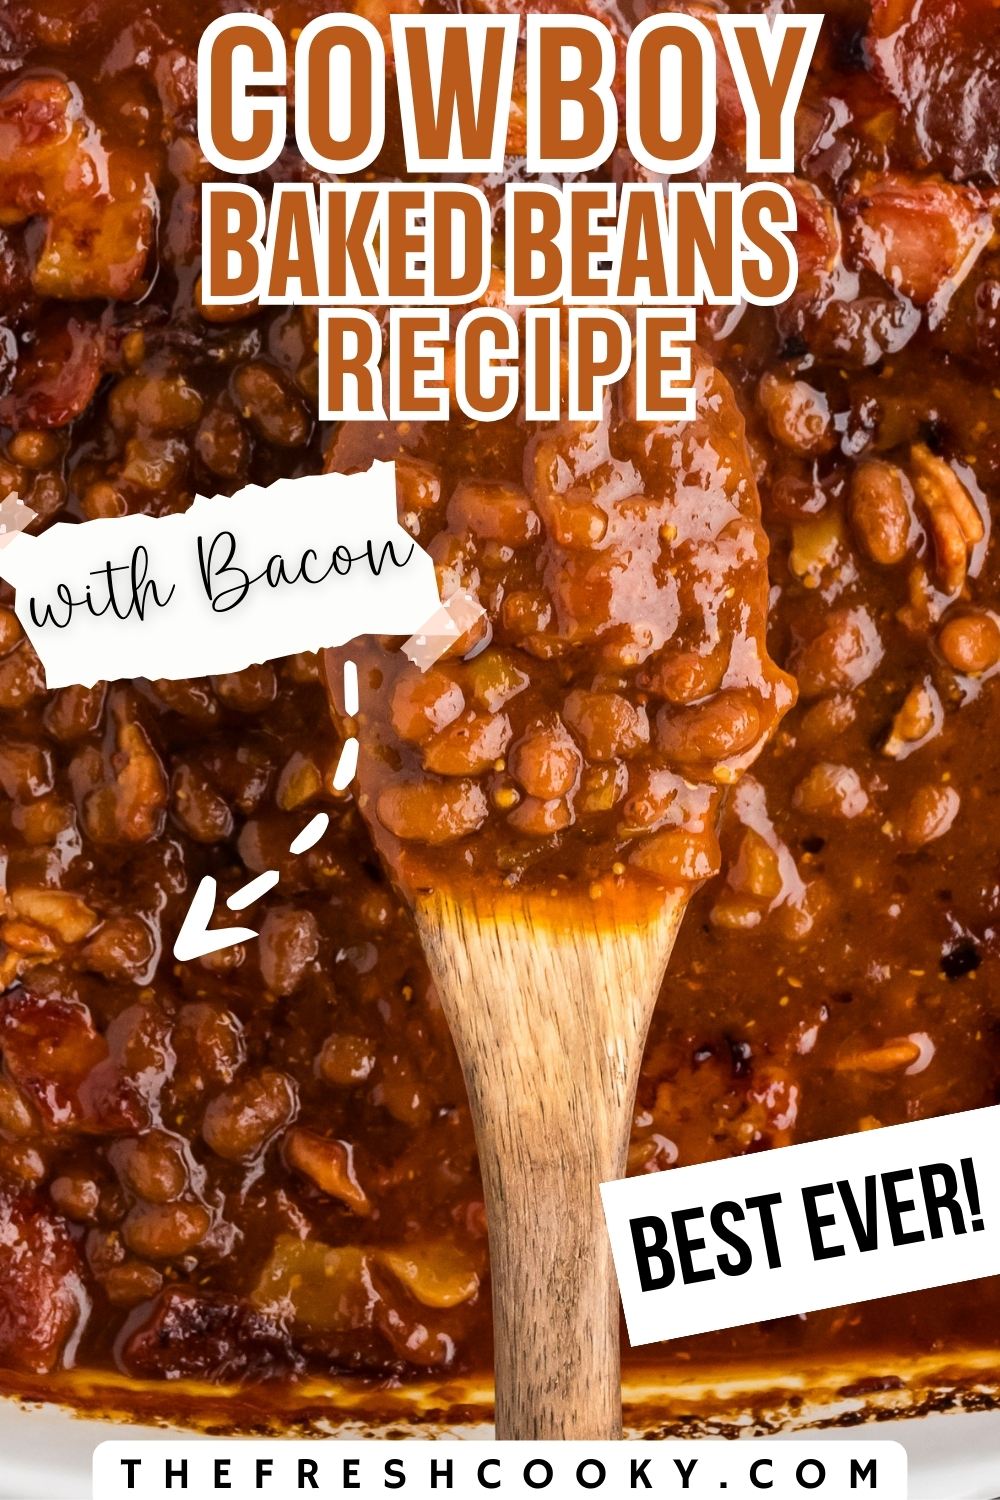 A wooden spoon scooping up a juicy, rich serving of cowboy baked beans - to pin.